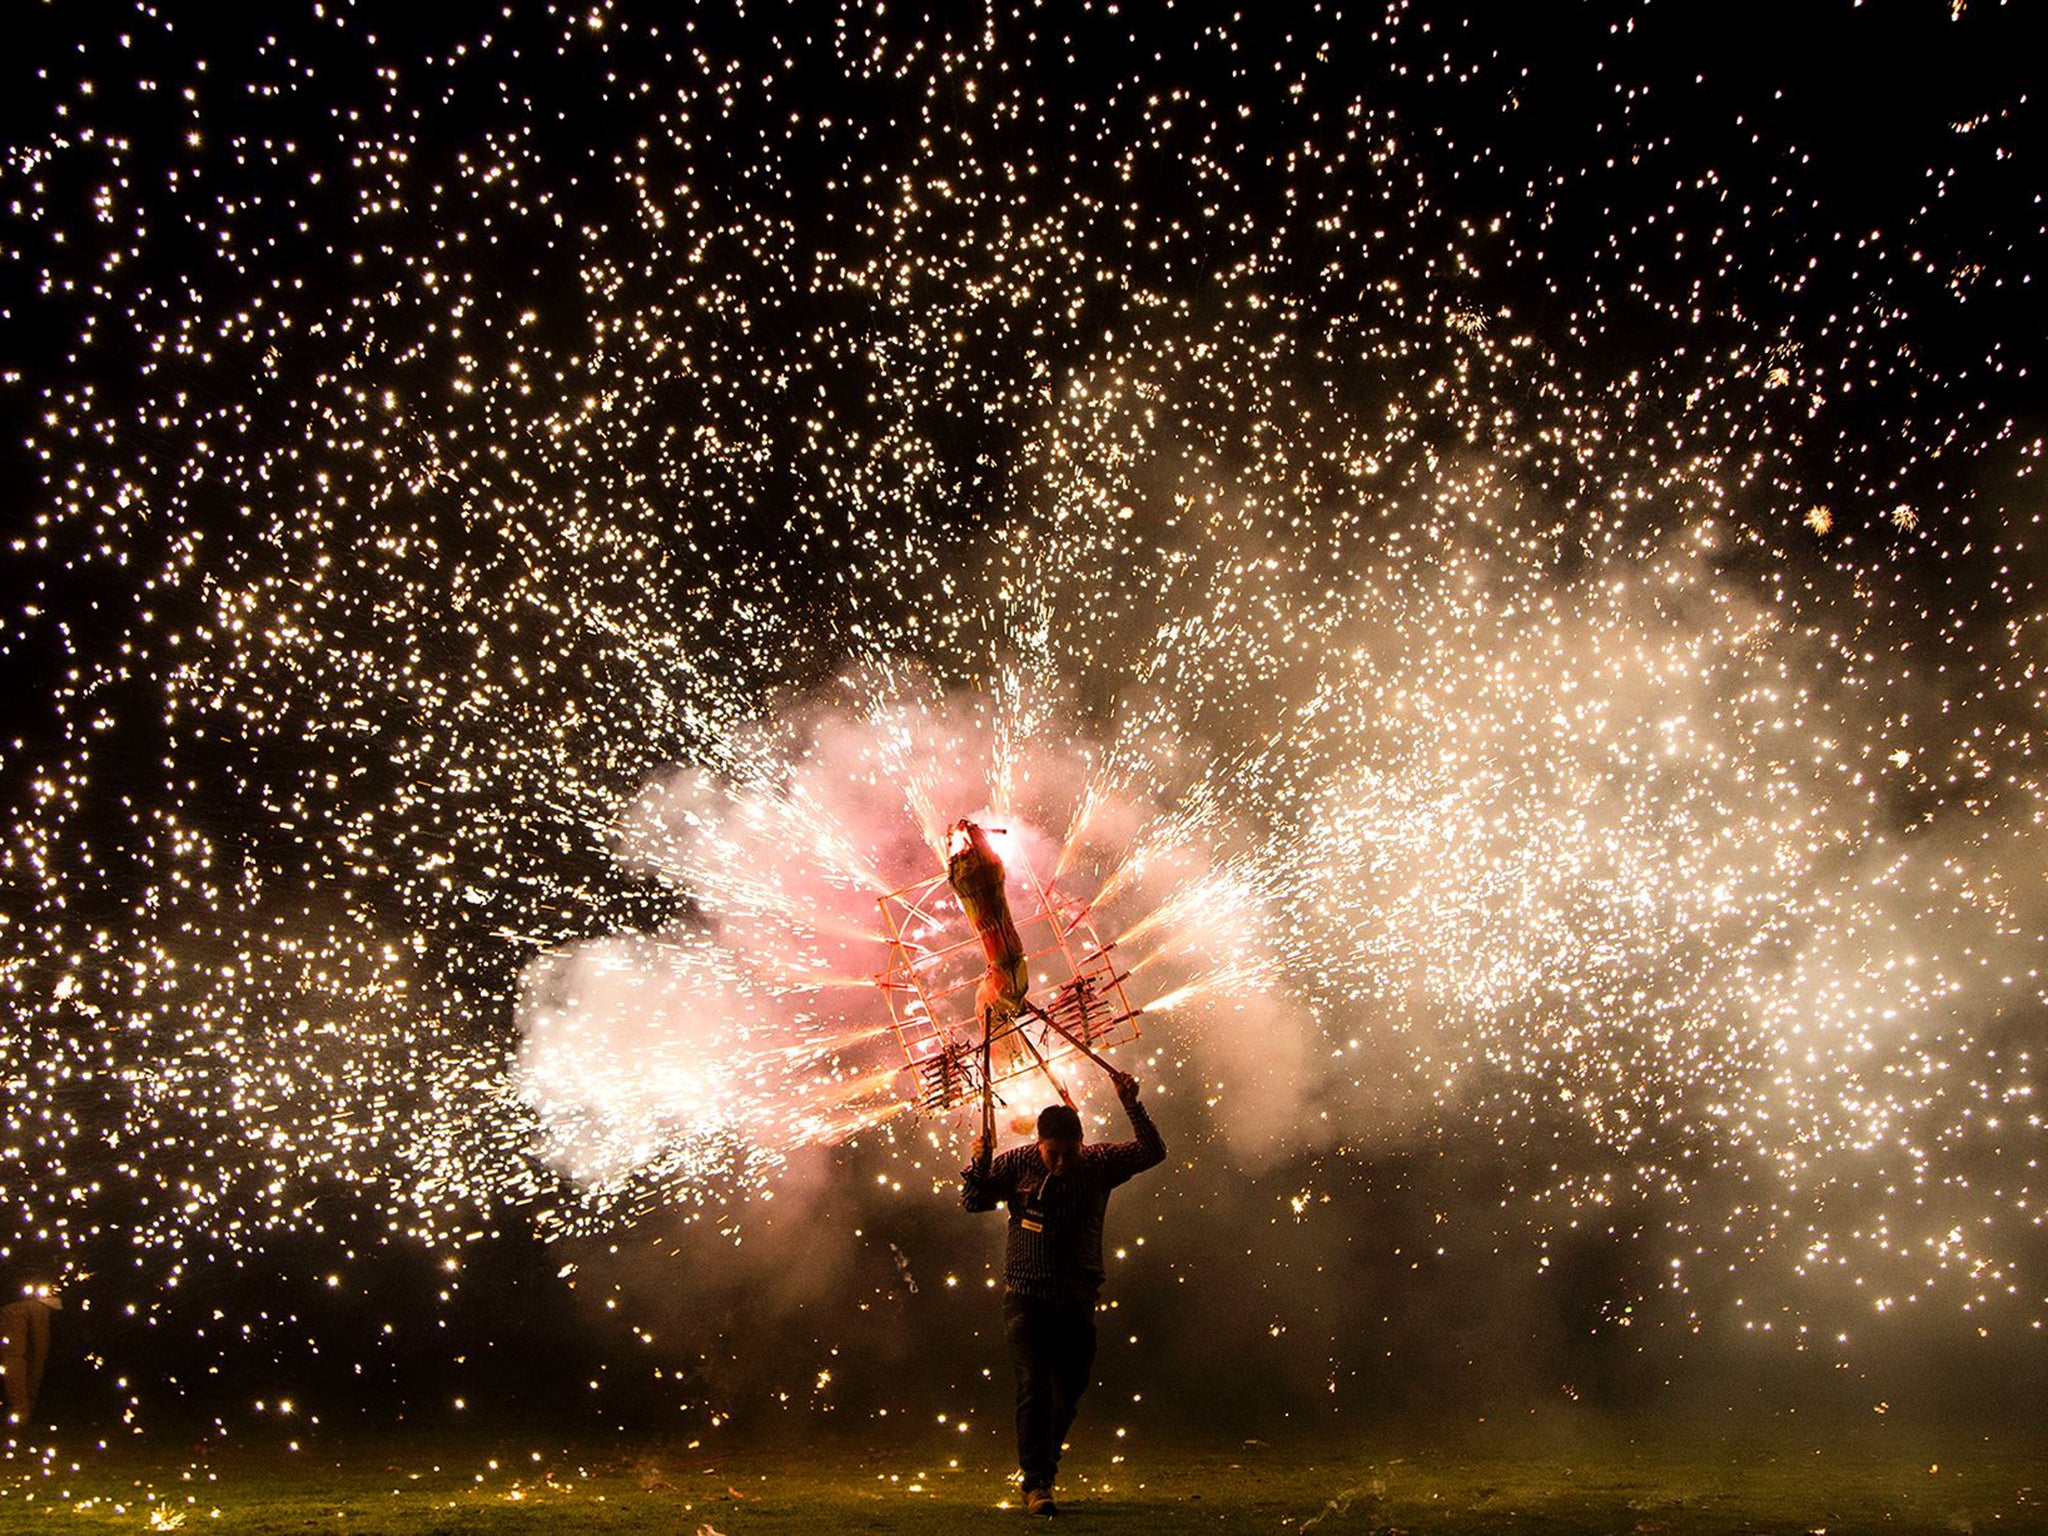 A man takes part in the International Fireworks Fair in Indaparapeo municipality, in Michoacan State, Mexico